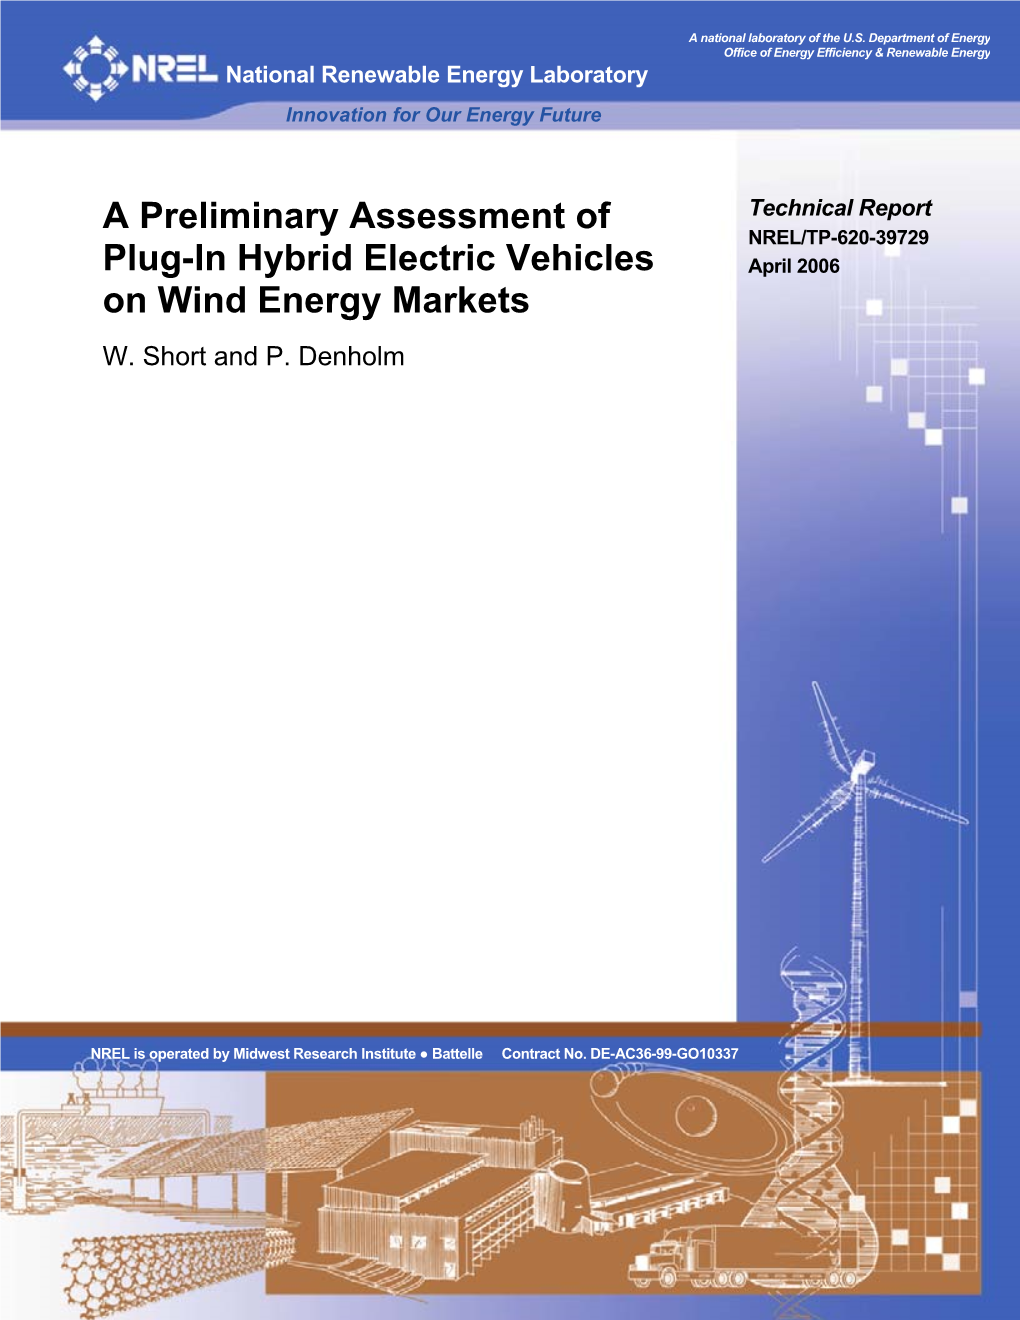 A Preliminary Assessment of Plug-In Hybrid Electric Vehicles on DE-AC36-99-GO10337 Wind Energy Markets 5B